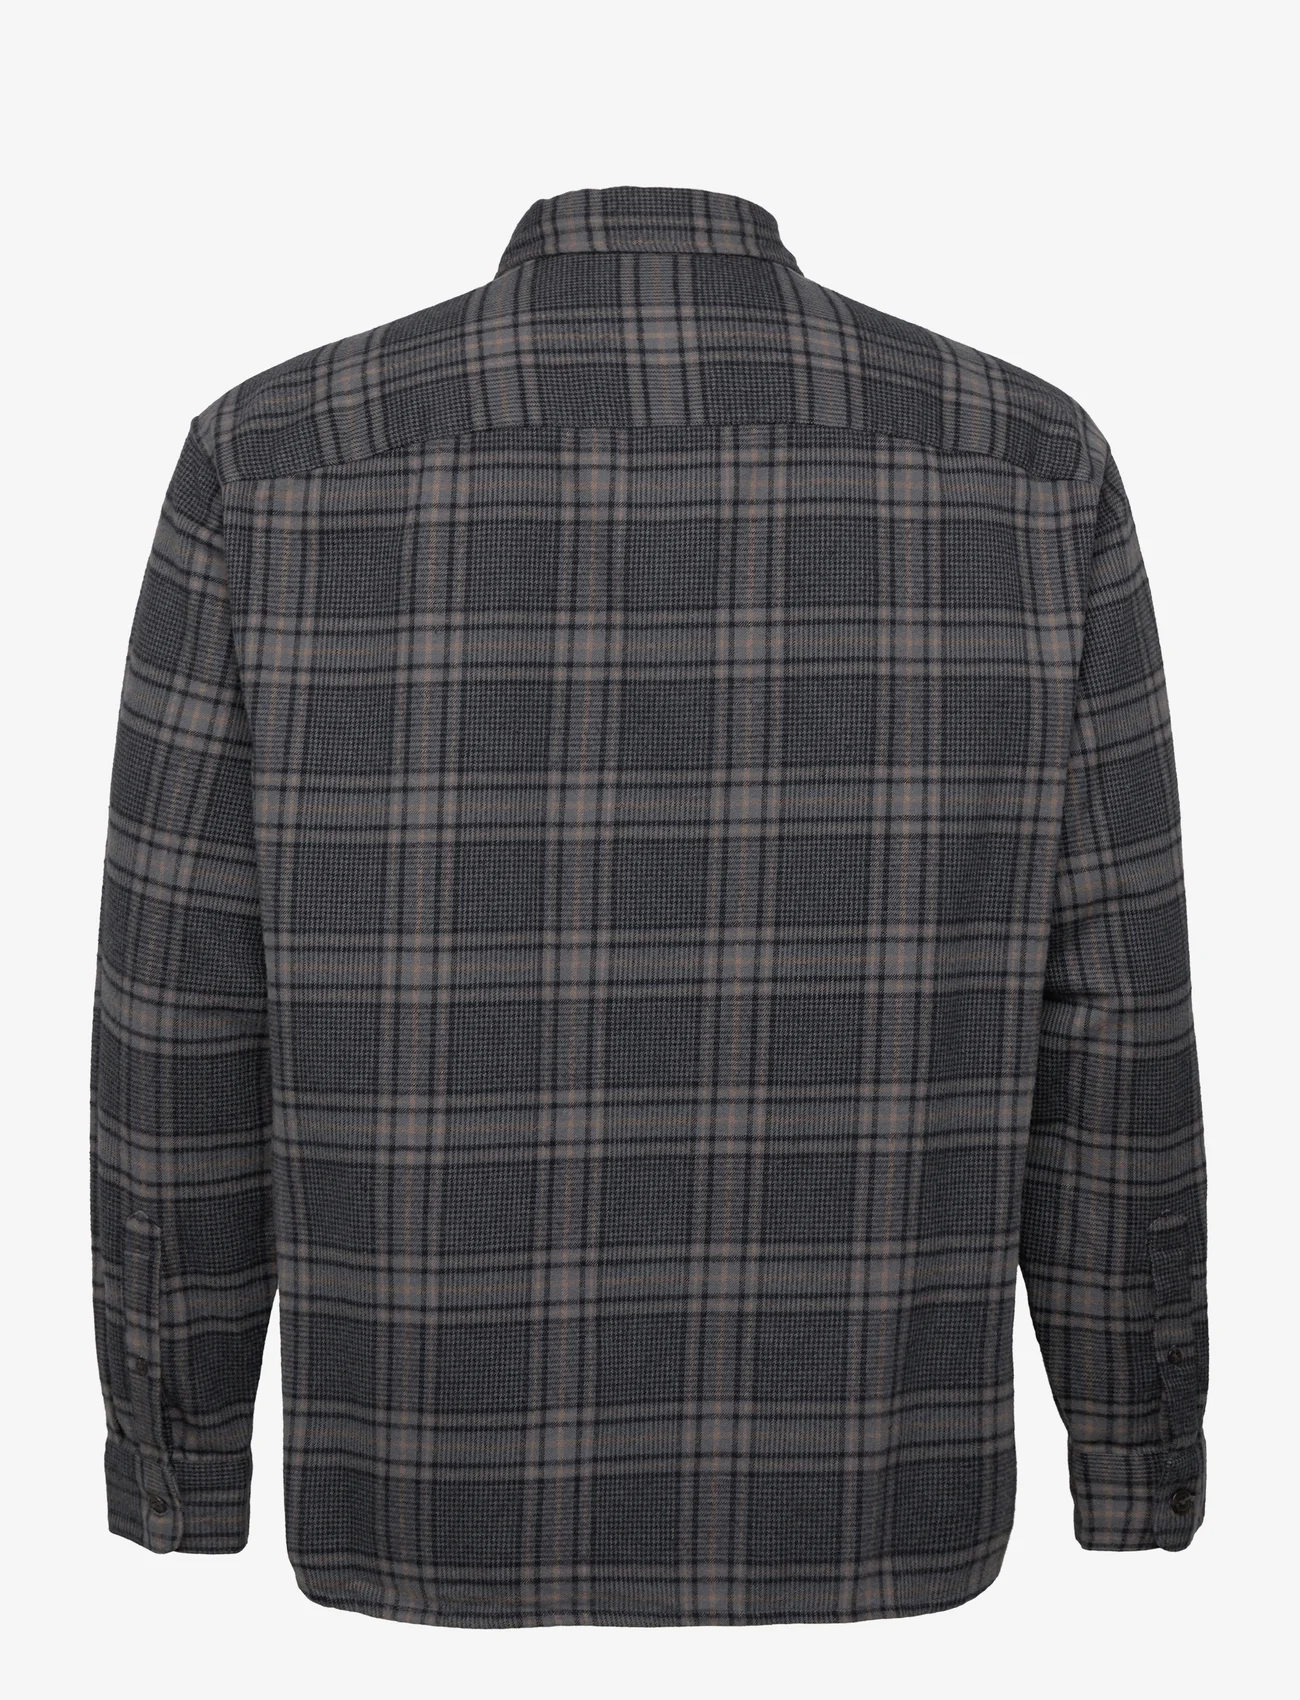 Abercrombie & Fitch - ANF MENS WOVENS - ternede skjorter - black plaid - 1